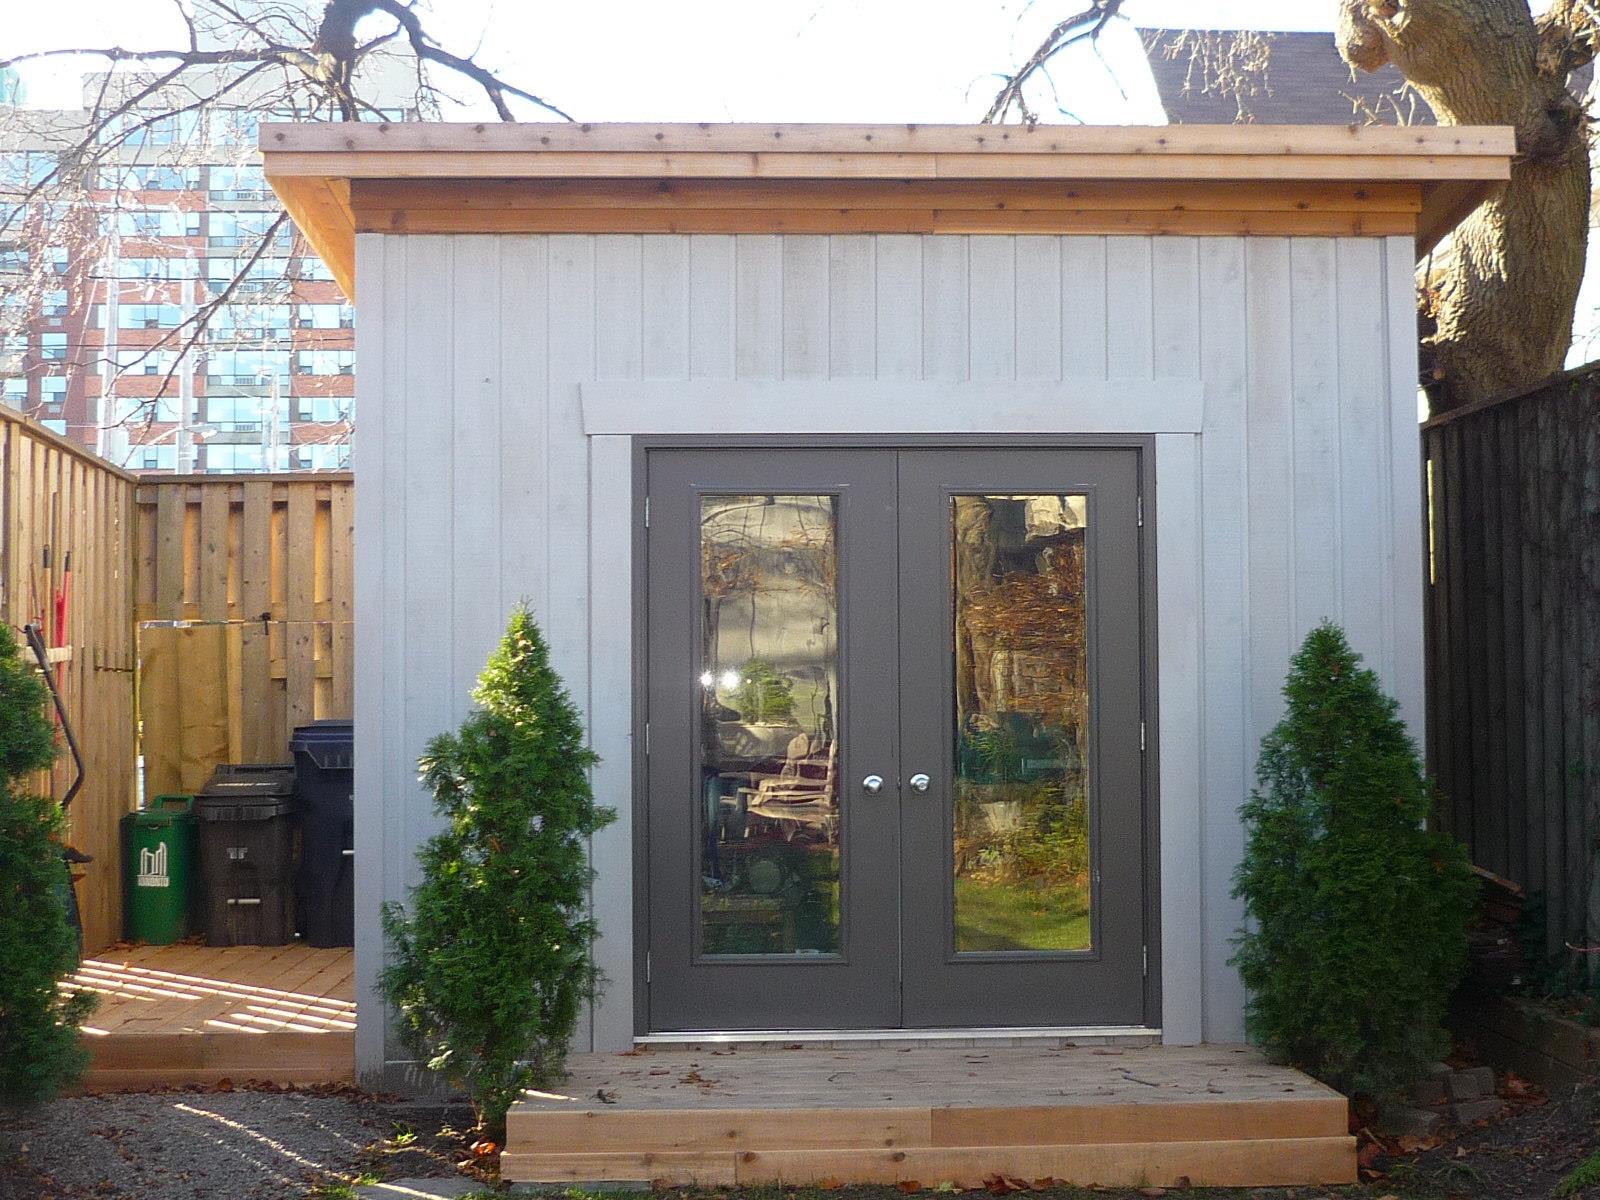 Urban Studio Pool House with French Doors in Toronto. Summerwood ID number 205686-2.